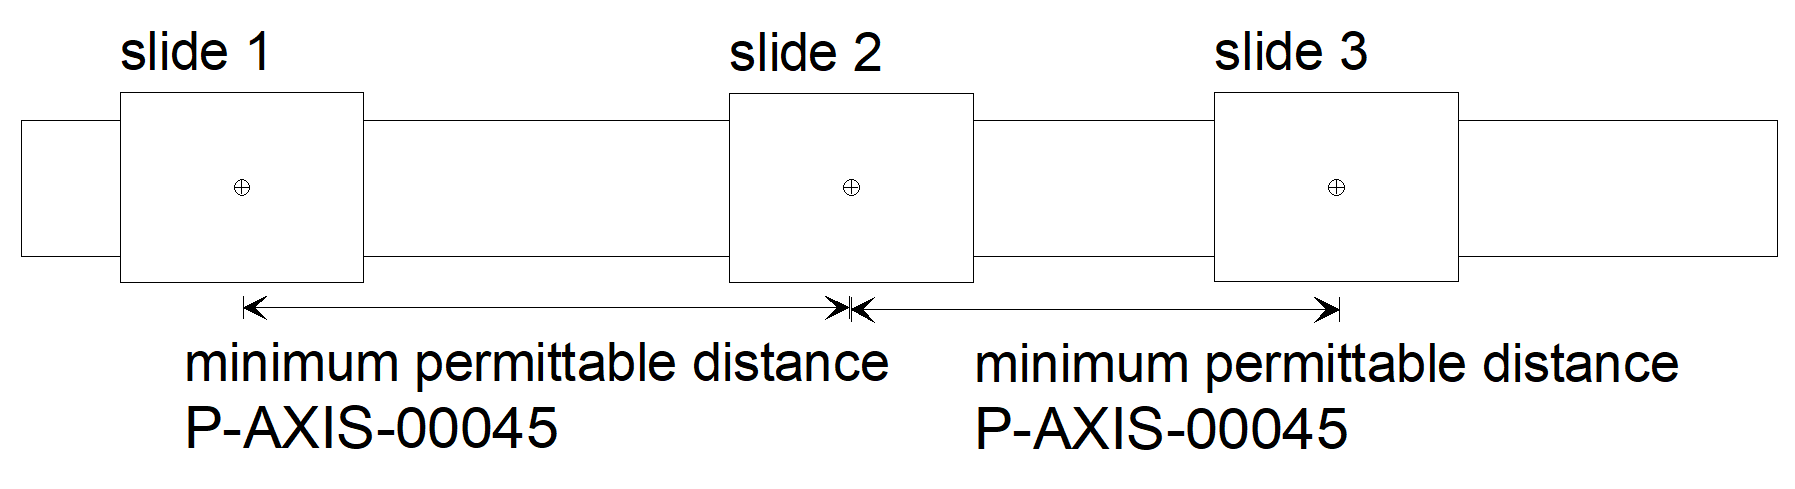 Minimum permitted distance between a collision pair